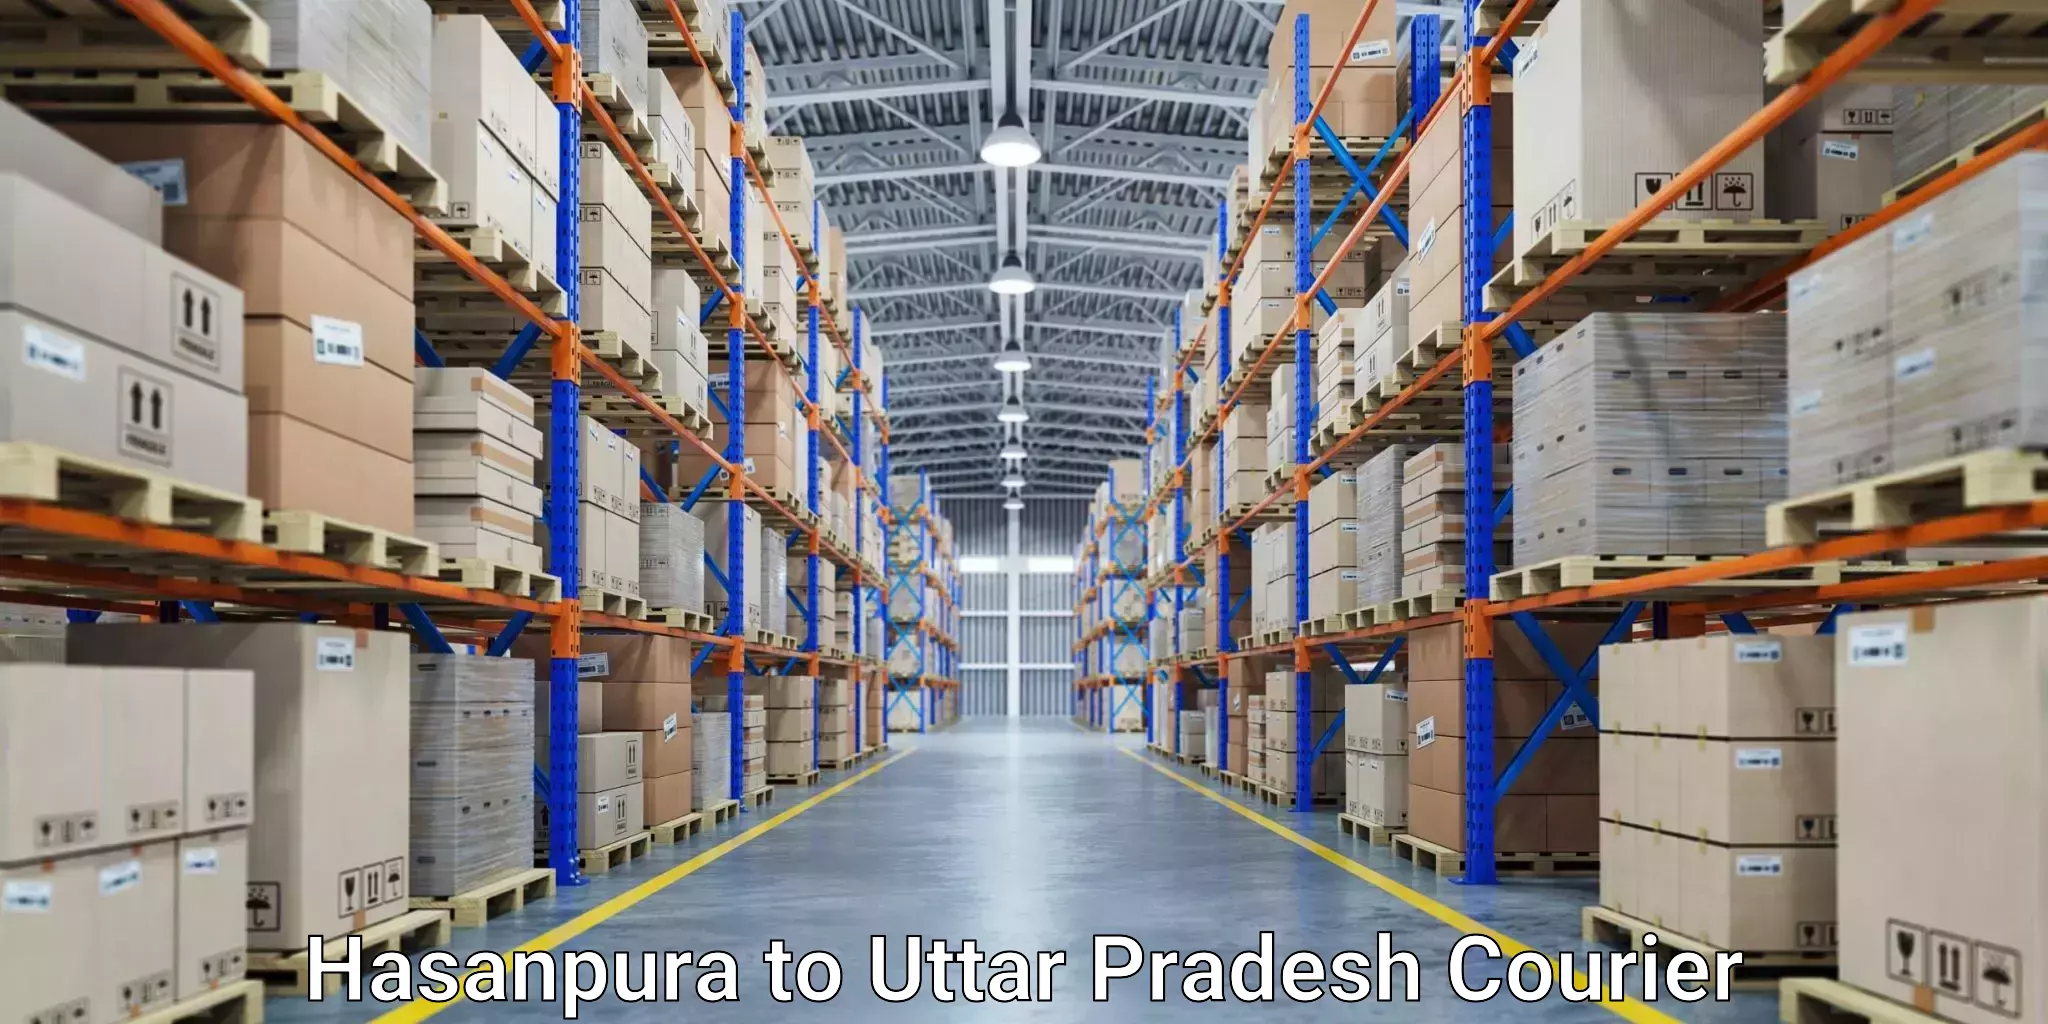 State-of-the-art courier technology Hasanpura to Jiyanpur